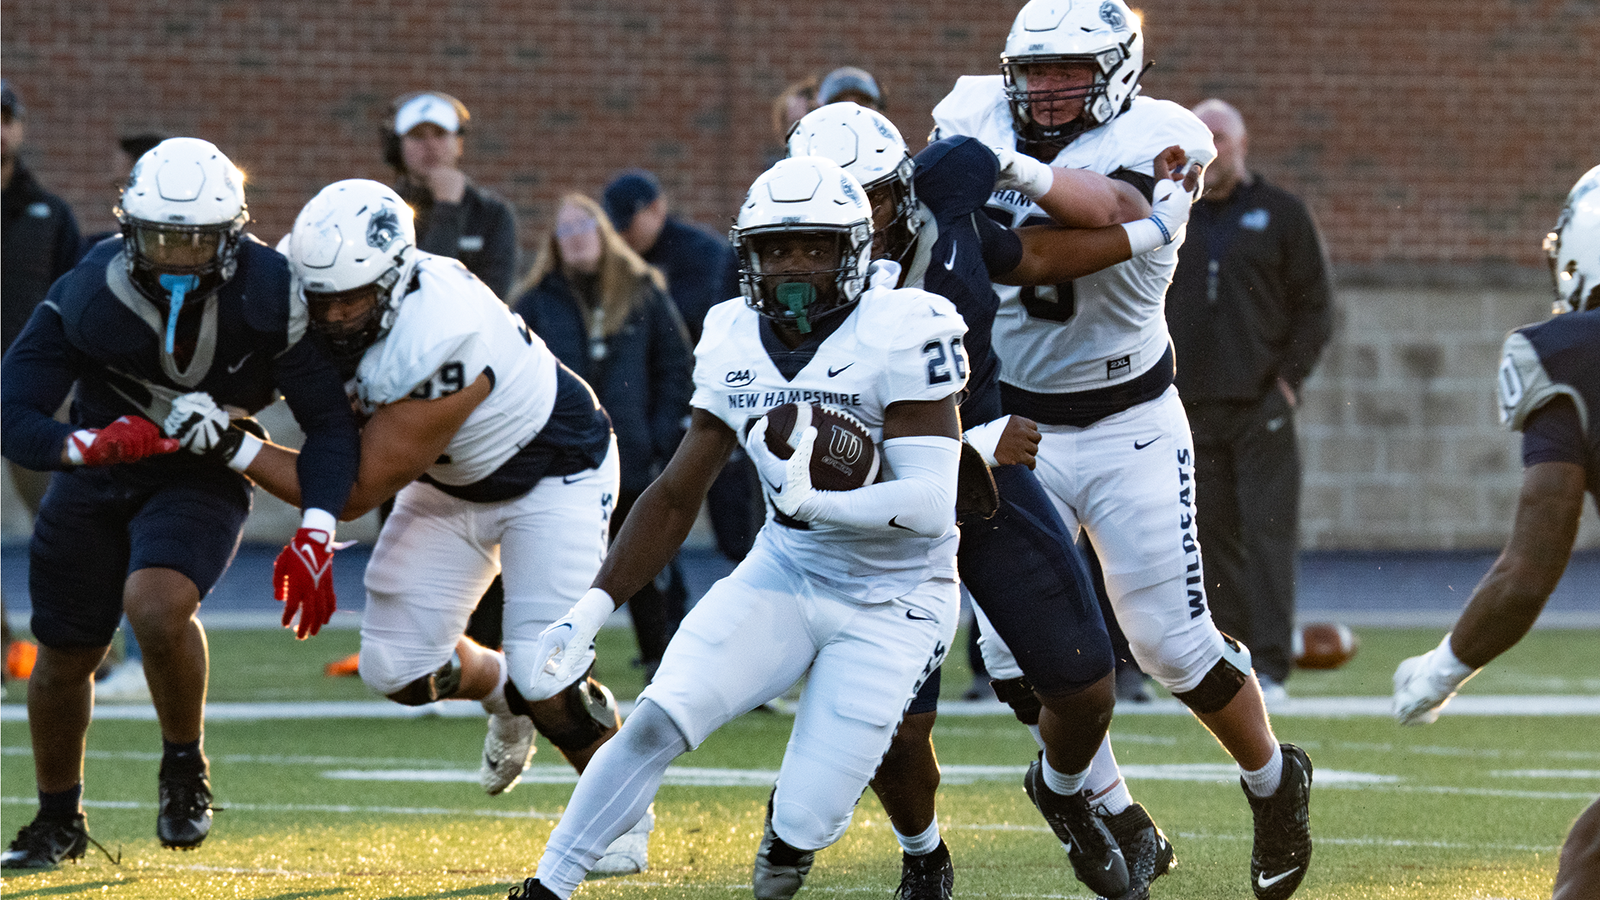 Morgan Throws for Three Touchdowns in Blue/White Spring Game